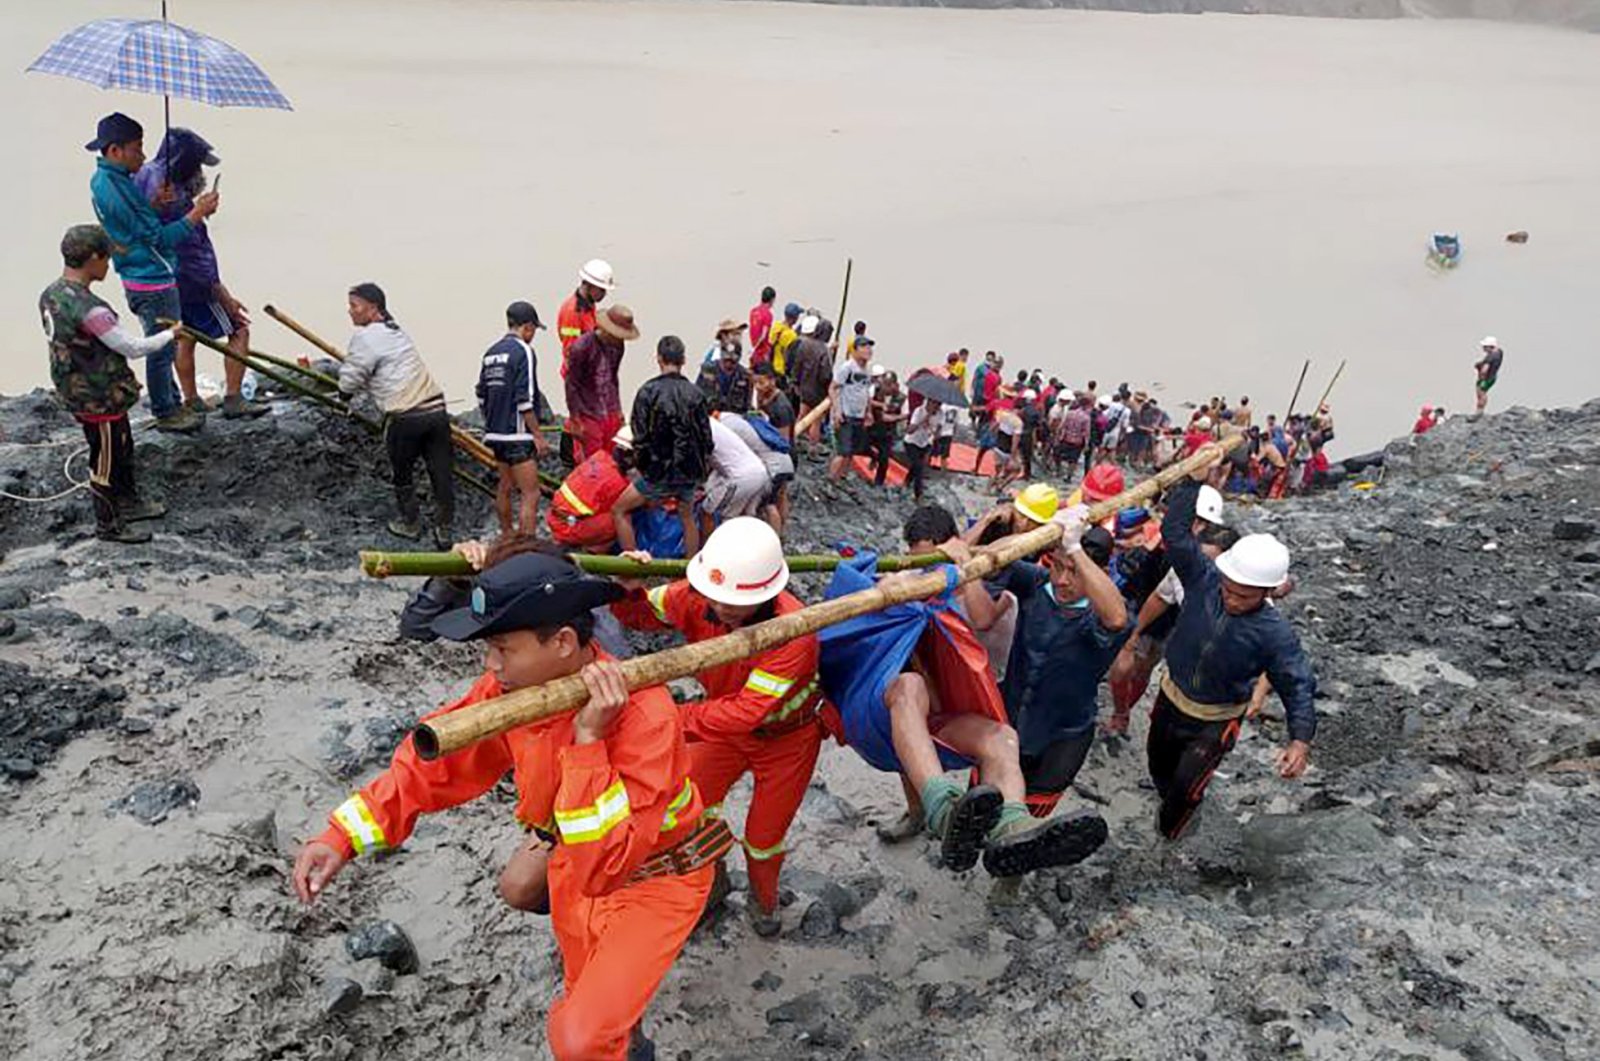 Rescue workers carry the body of a victim after a landslide accident at a jade mining site in Hpakant, Kachin State, Myanmar, July 2, 2020. (EPA-EFE/Myanmar Fire Services Department)